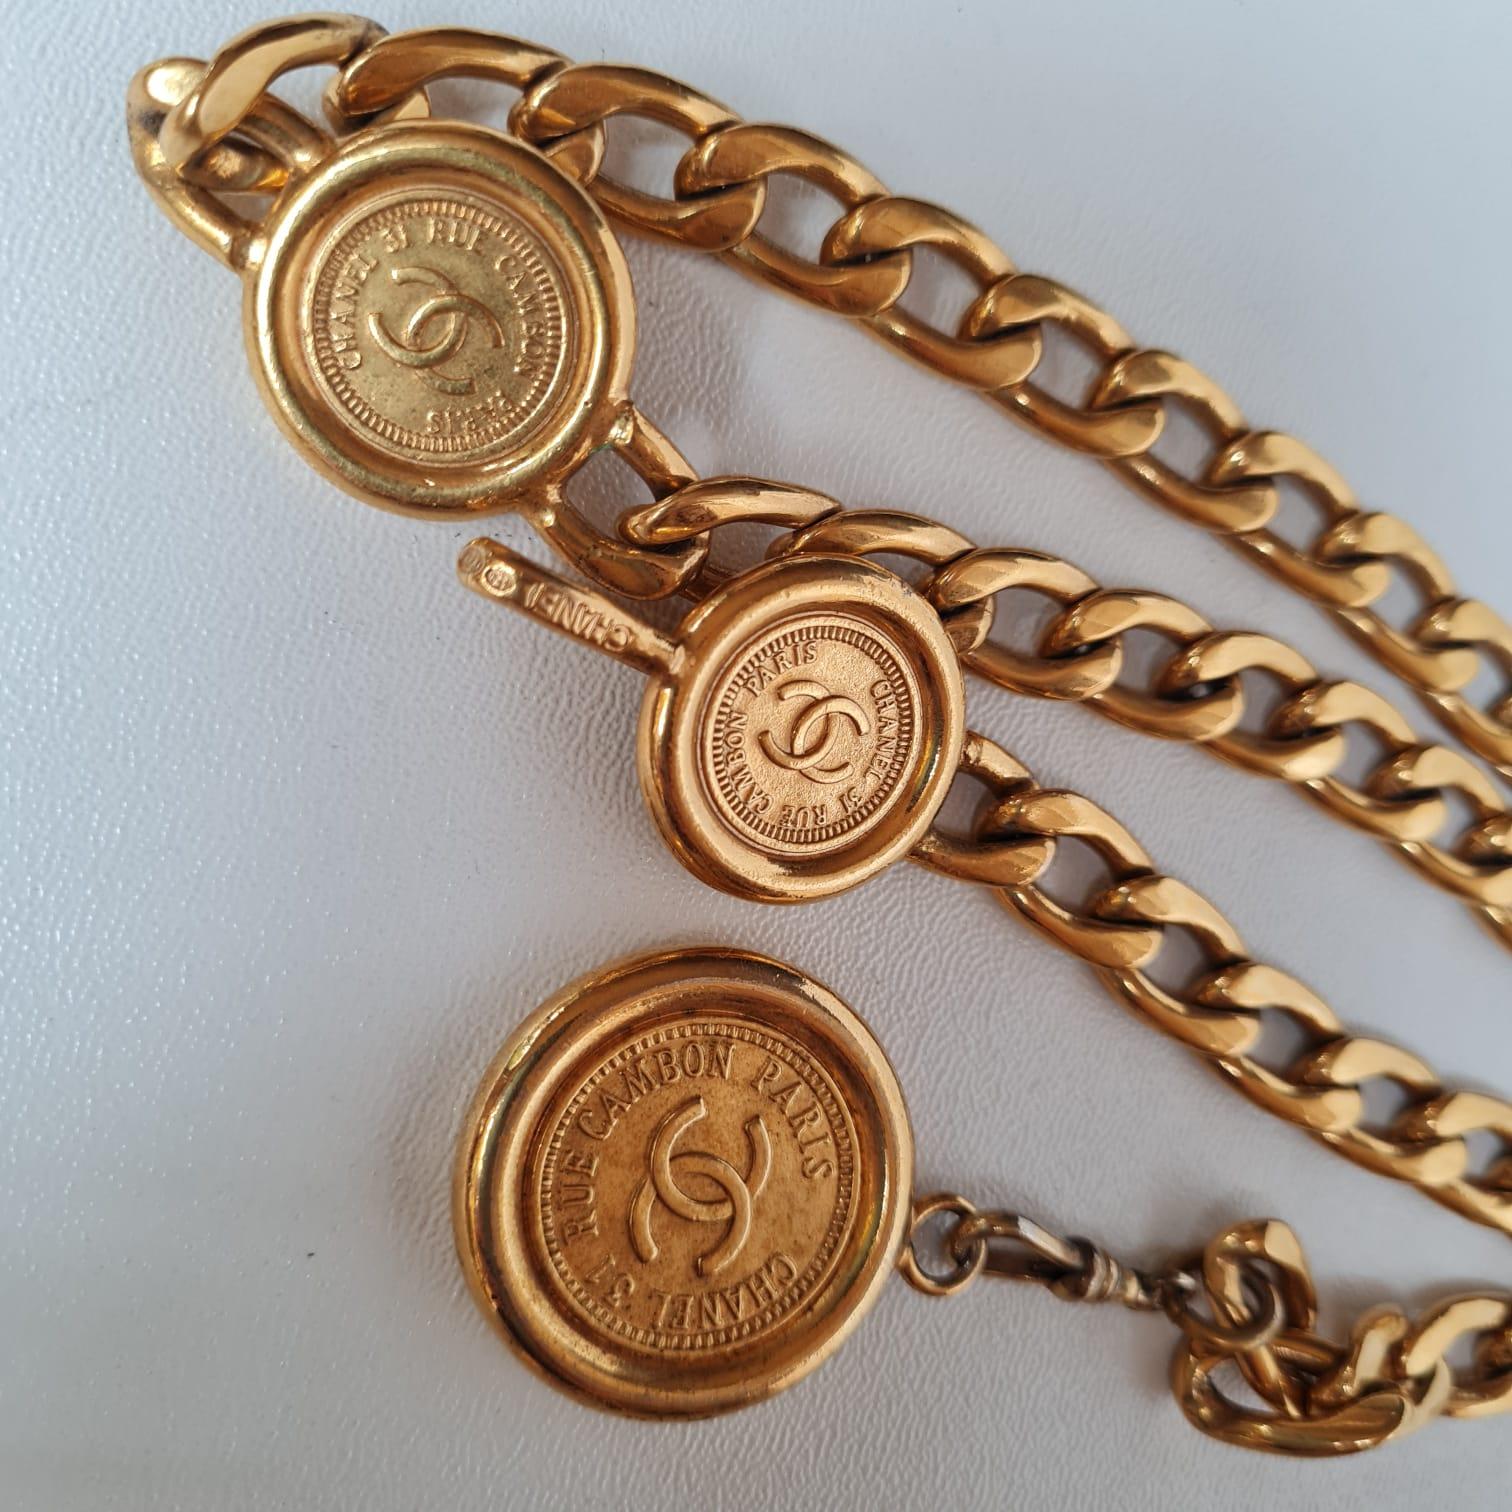 Beautiful and rare vintage chanel coin chain belt in gold. Great condition overall. Light rubbing marks, but overall still in great condition. Length is 95cm. Belt only.